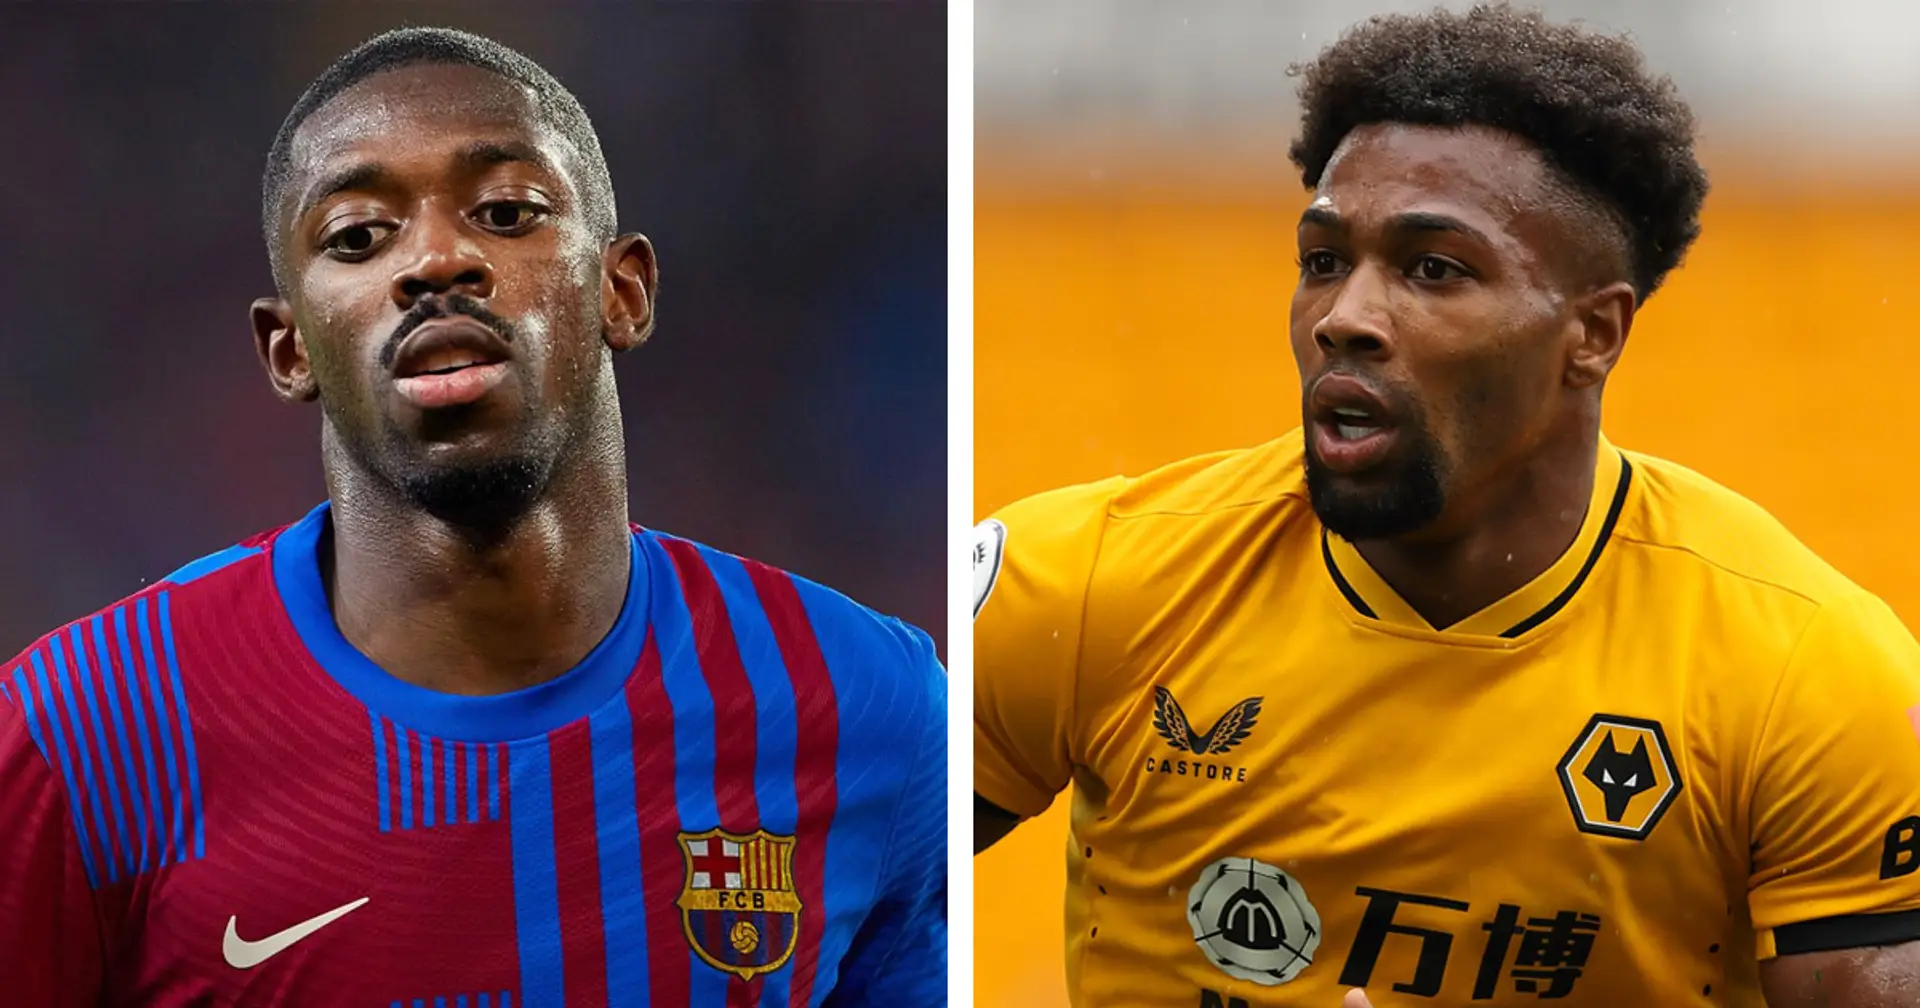 Barca working to sign Adama Traore if Dembele doesn't renew (reliability: 3 stars)